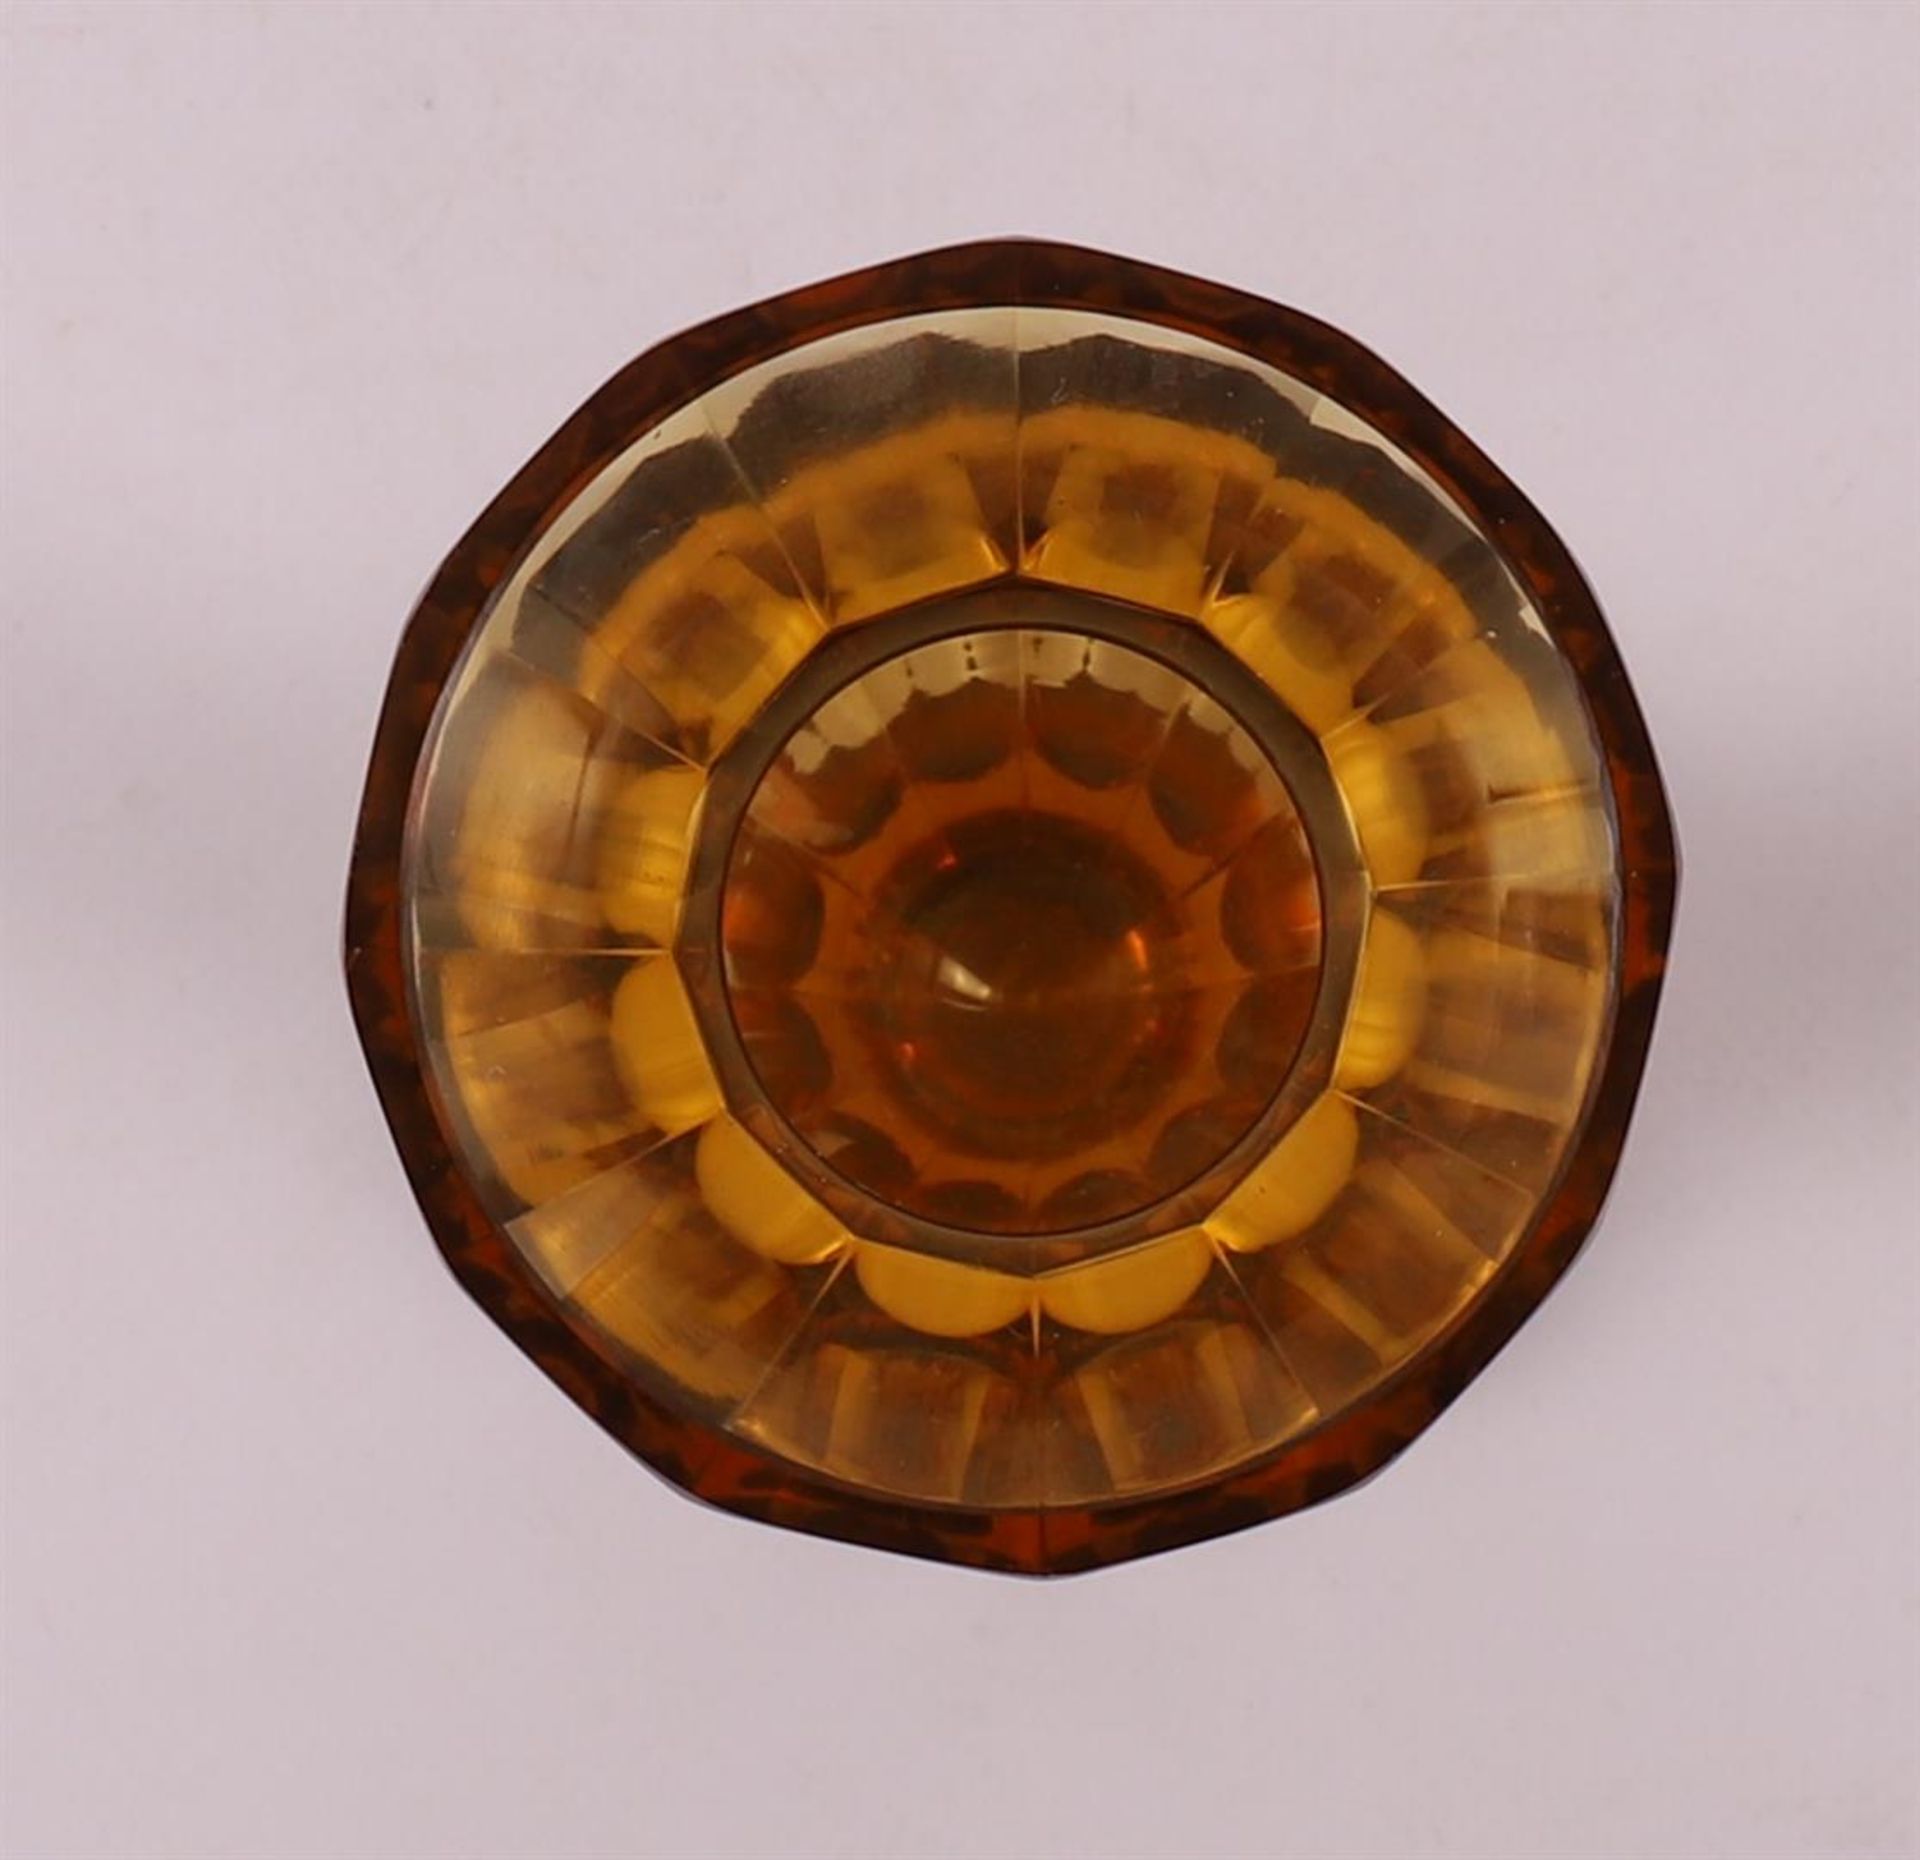 An amber clear glass faceted Art Deco vase, Austria, Moser, ca 1930 - Image 3 of 4